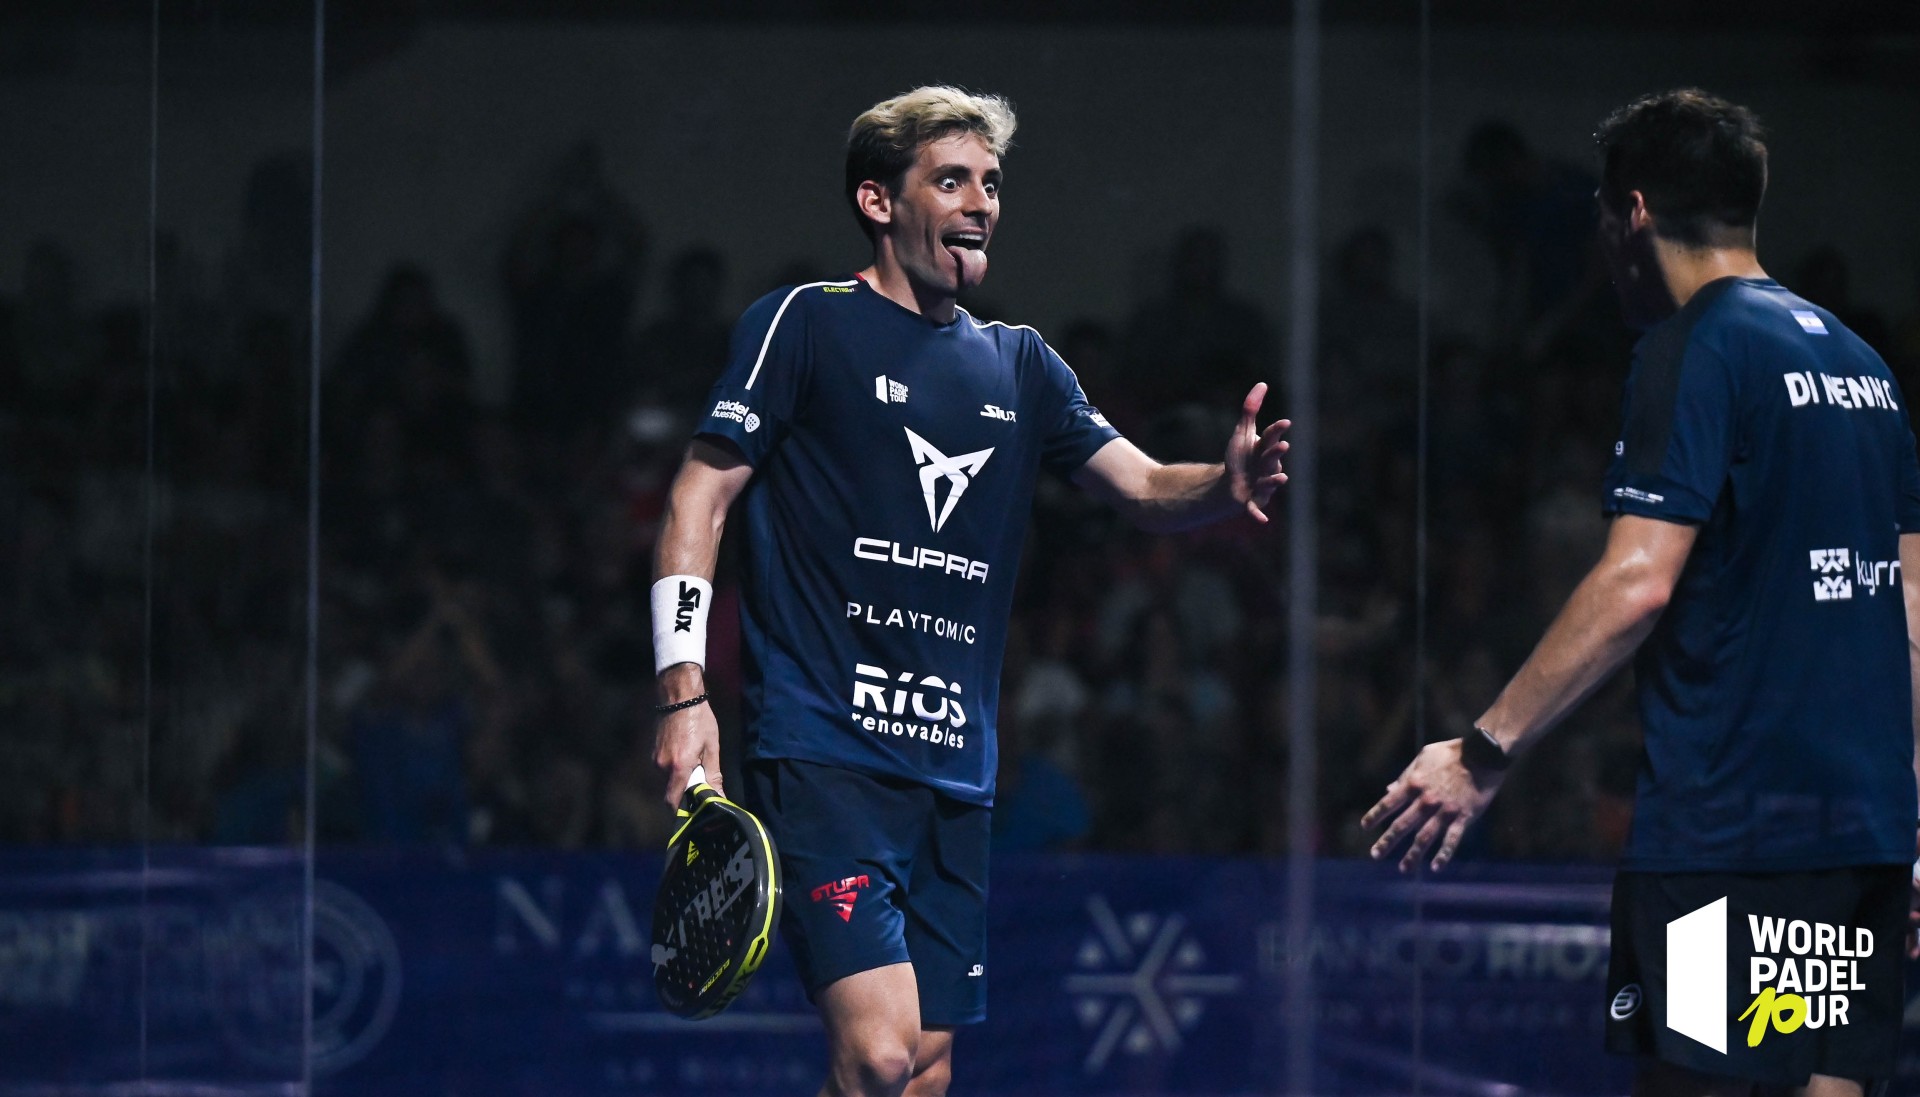 Watch: The three best men's points from the La Rioja Open 2023!